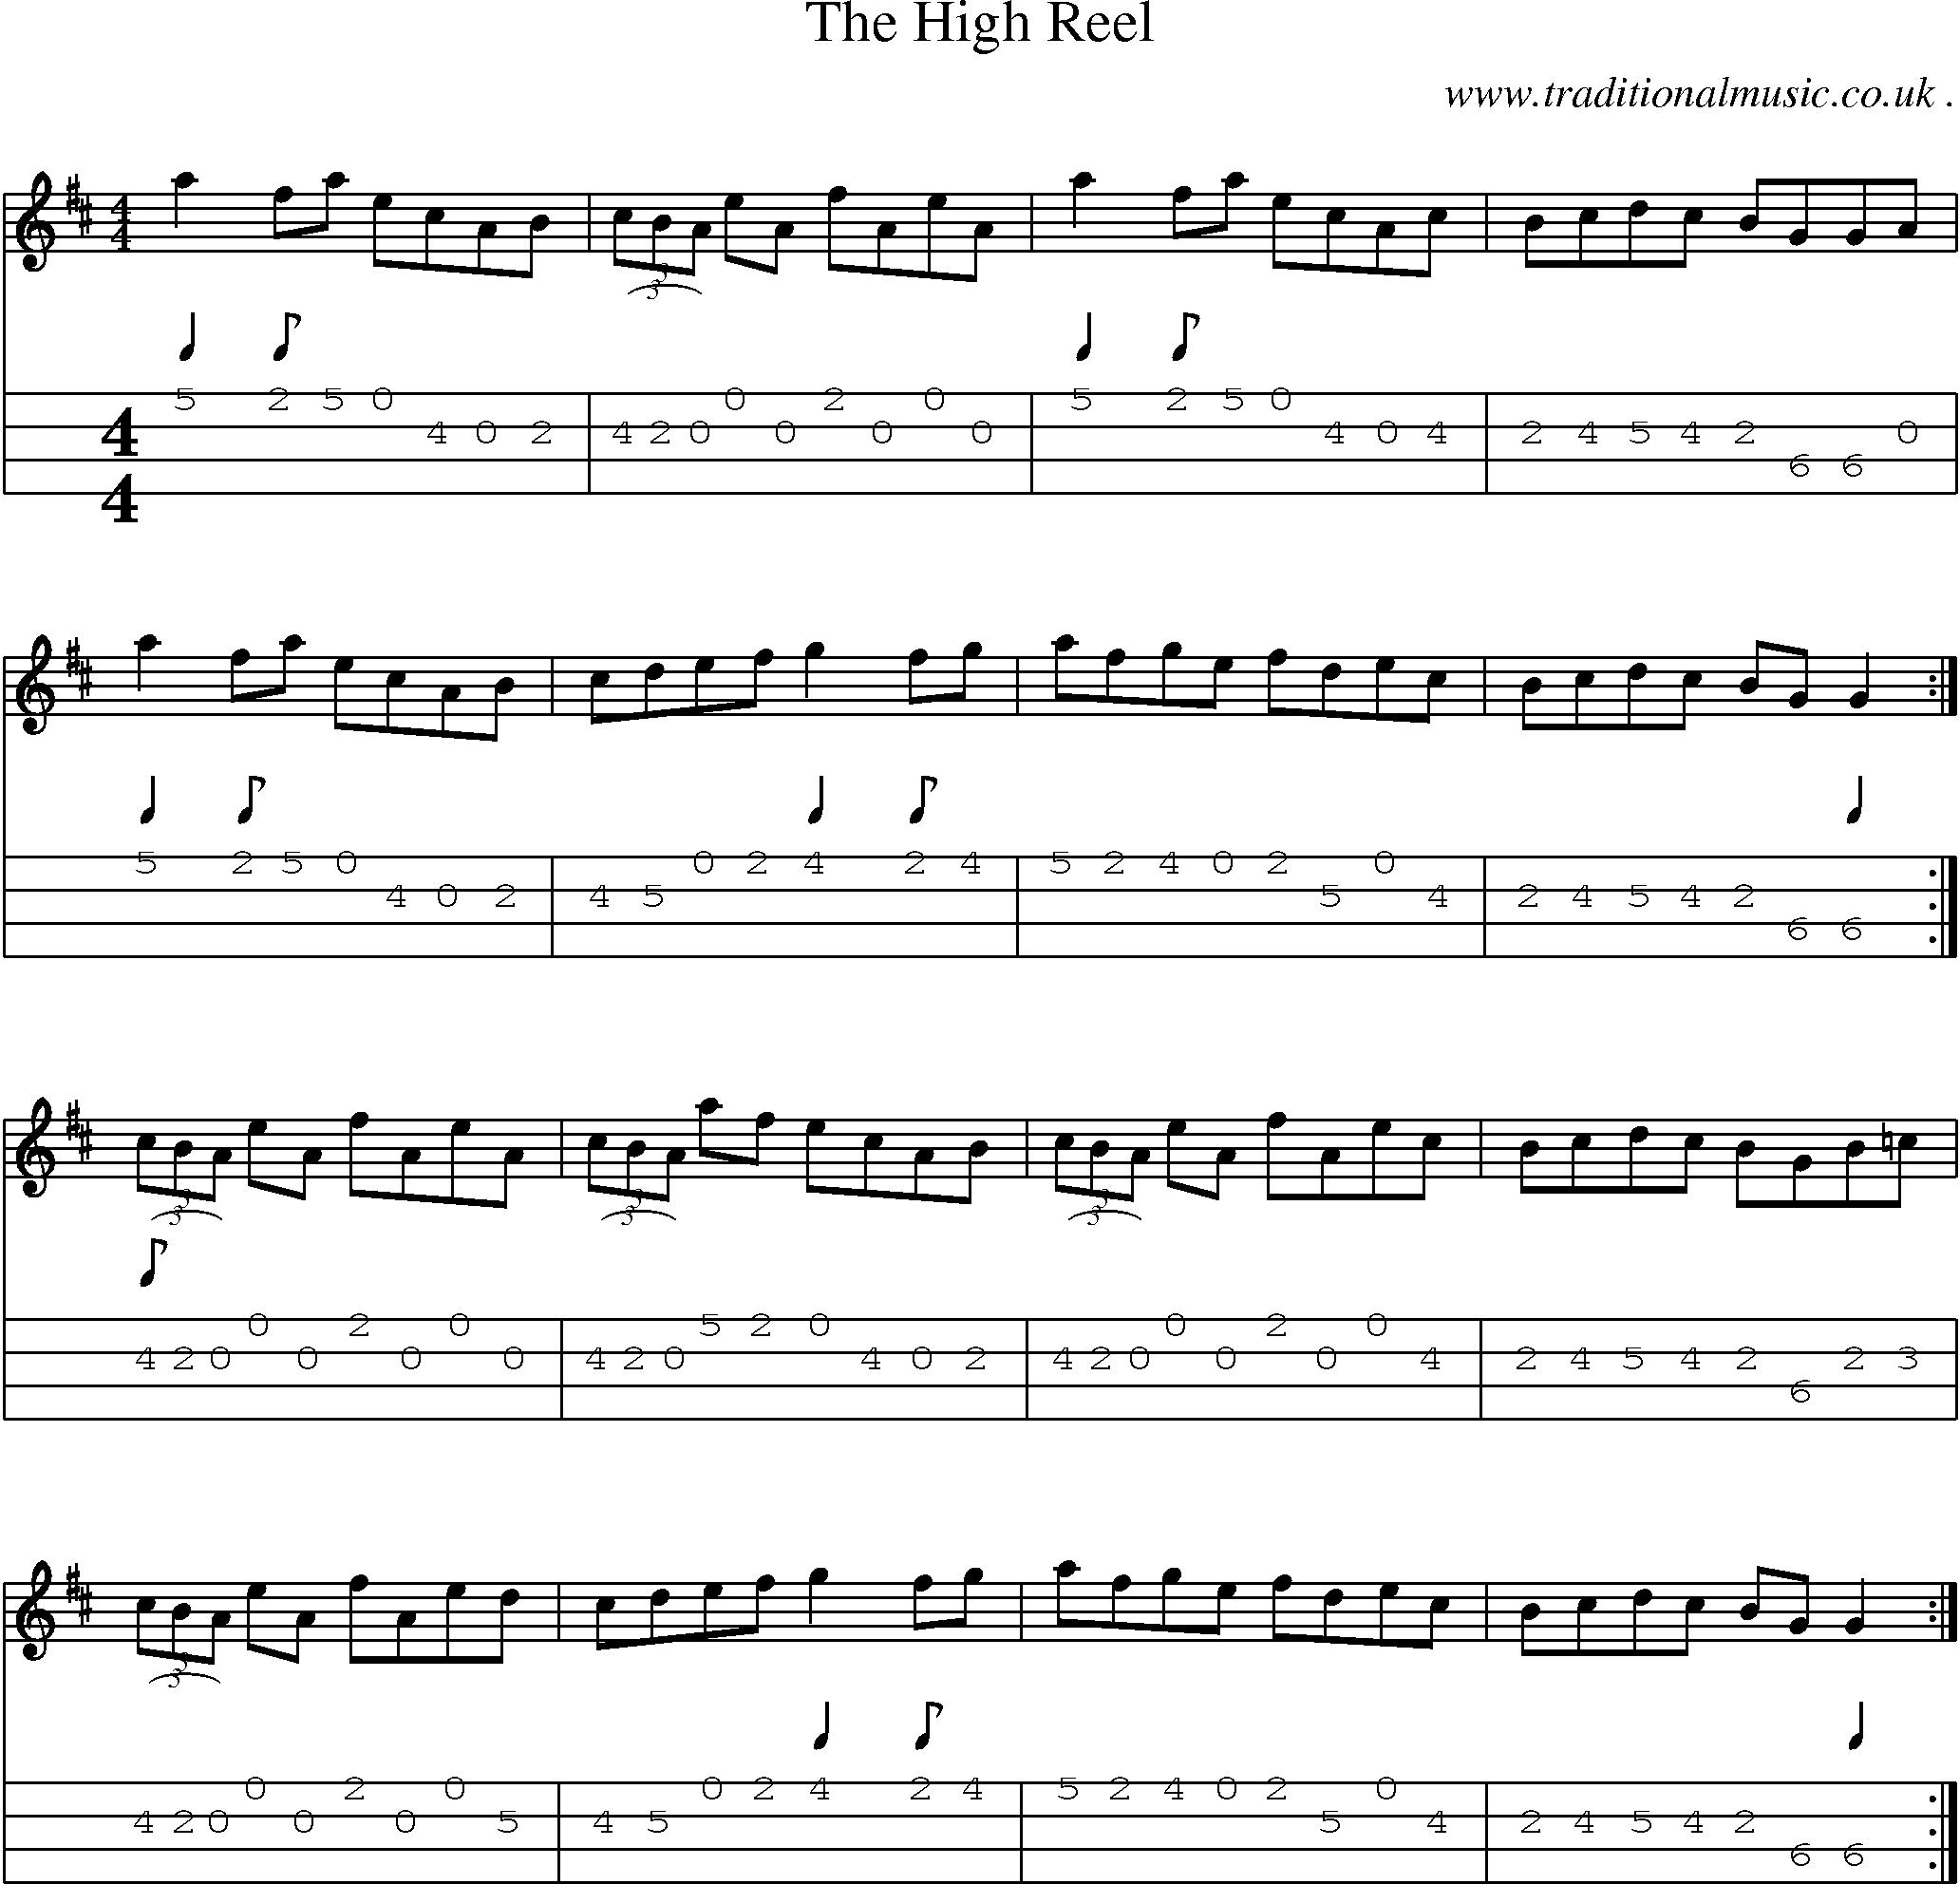 Sheet-music  score, Chords and Mandolin Tabs for The High Reel